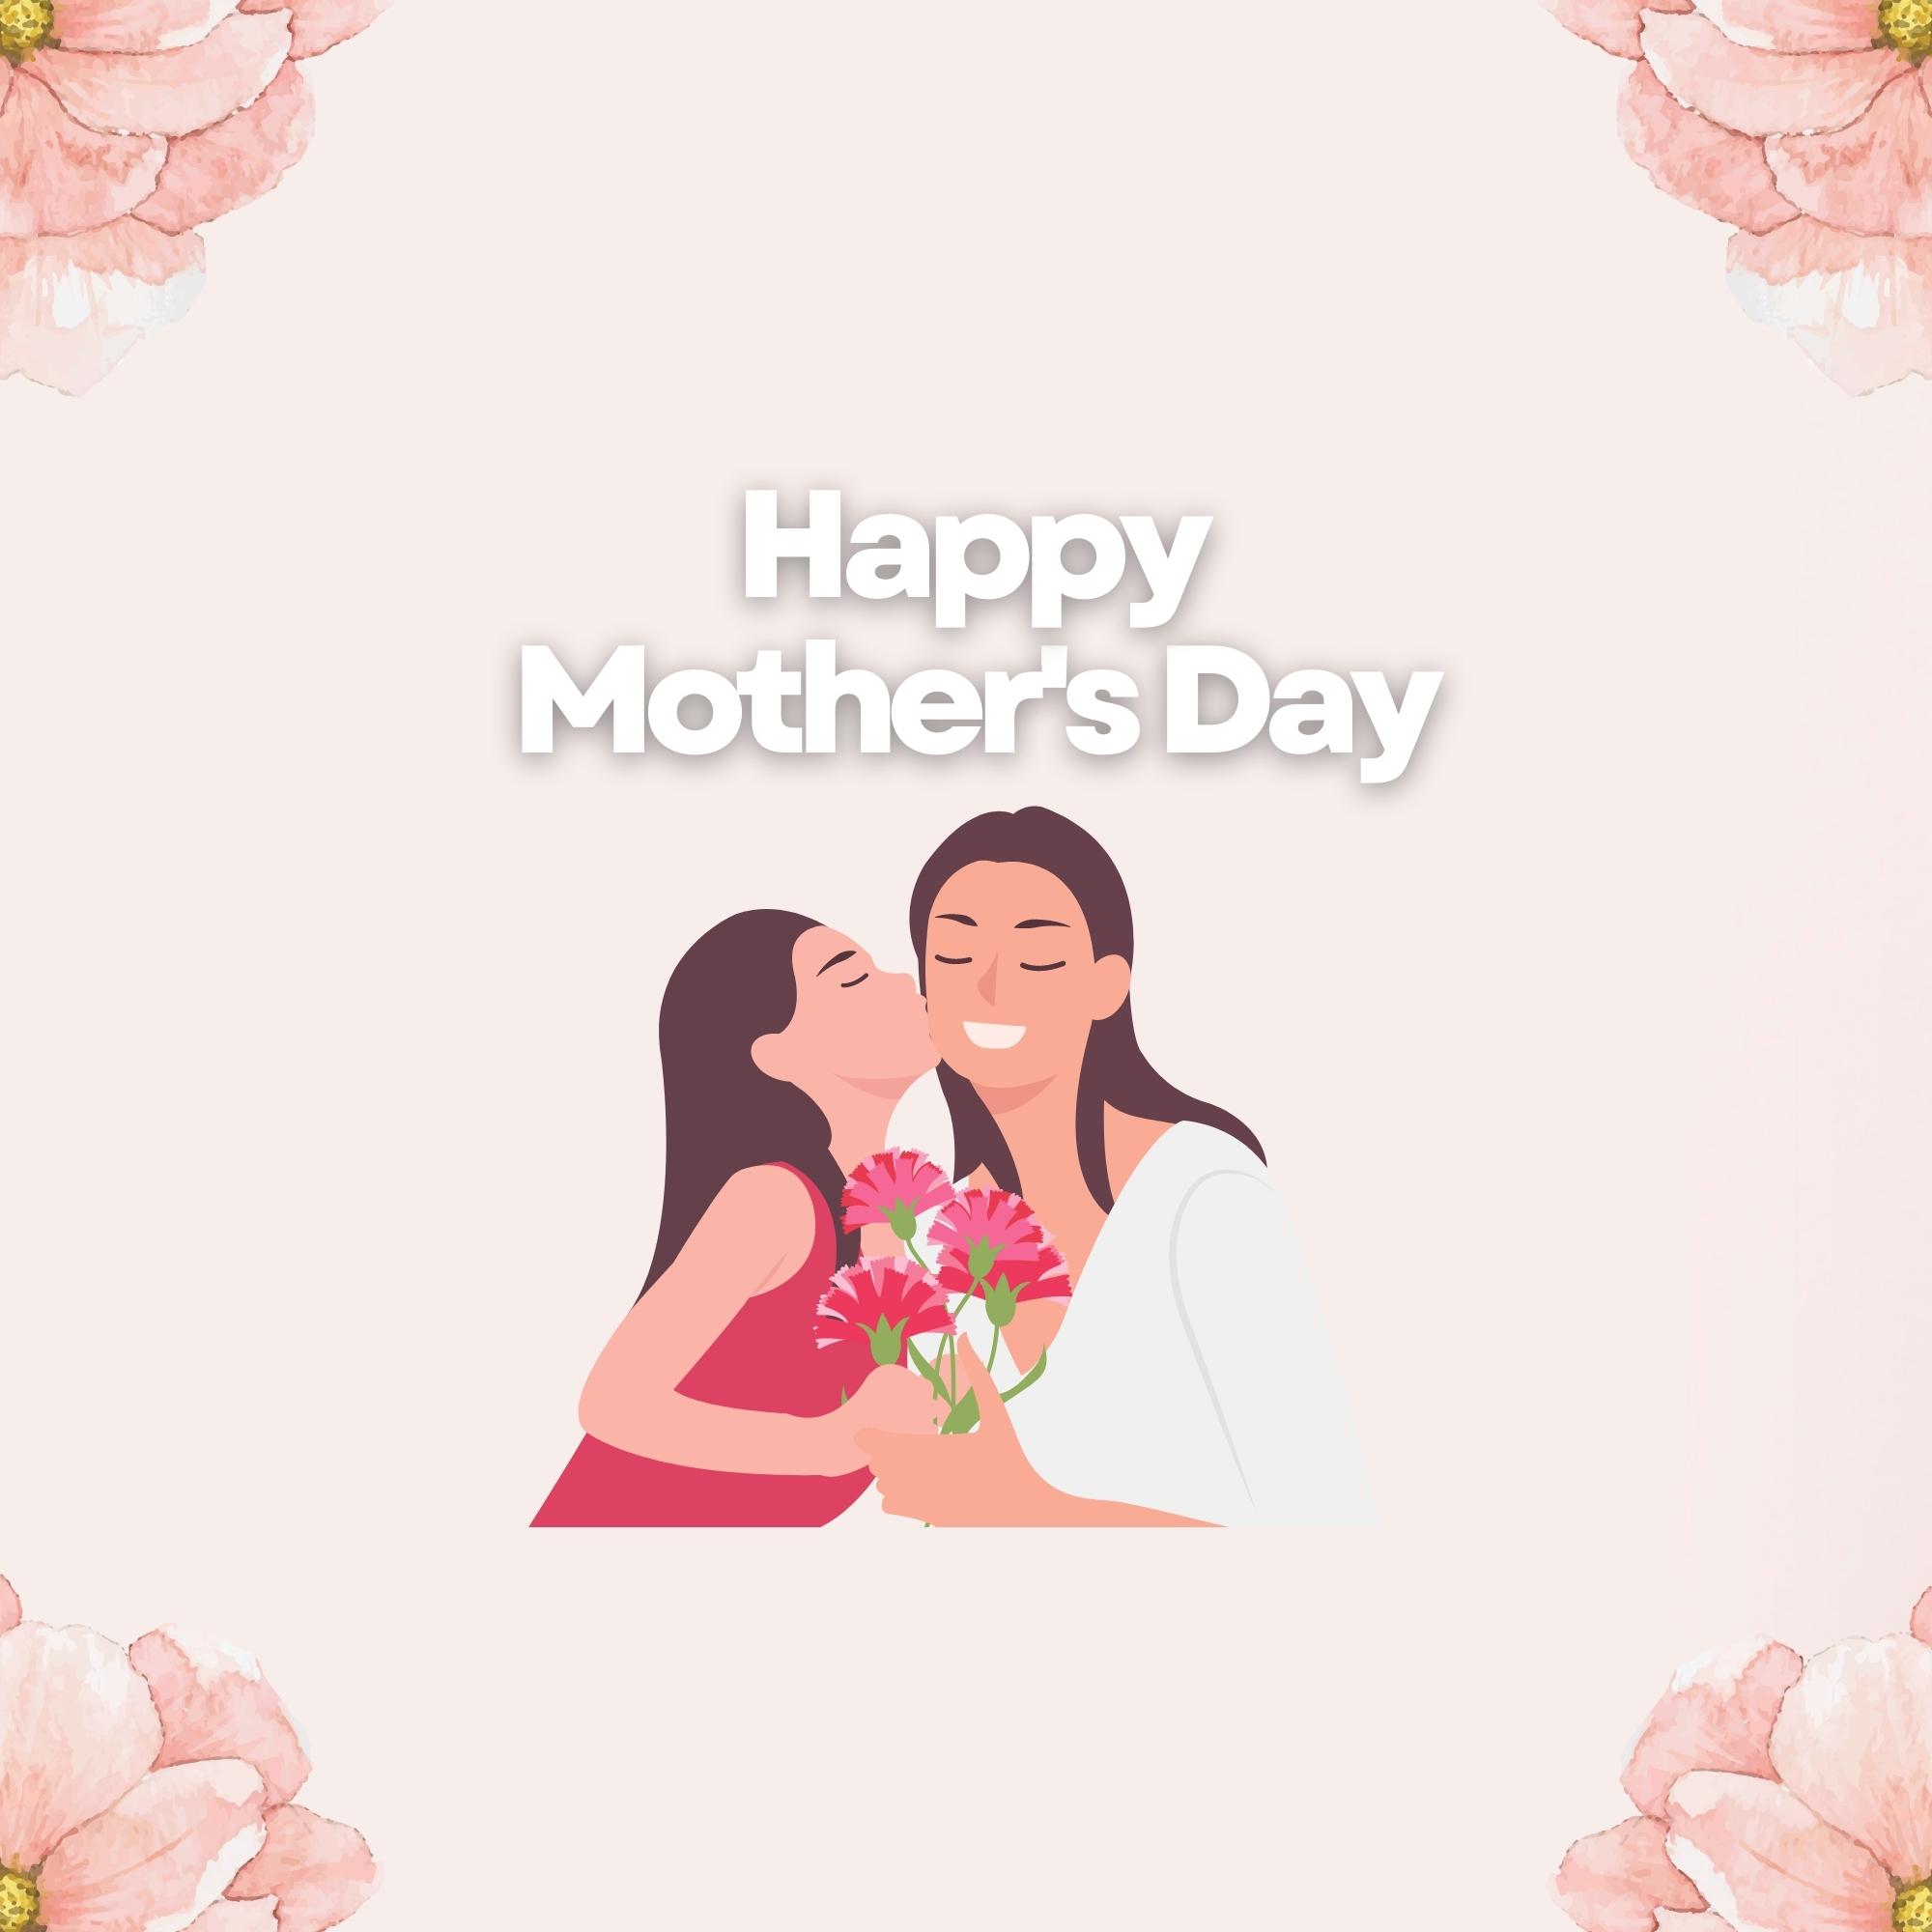 Happy Mothers Day Images | 1020 | Free Download [8k,4k,Hd]